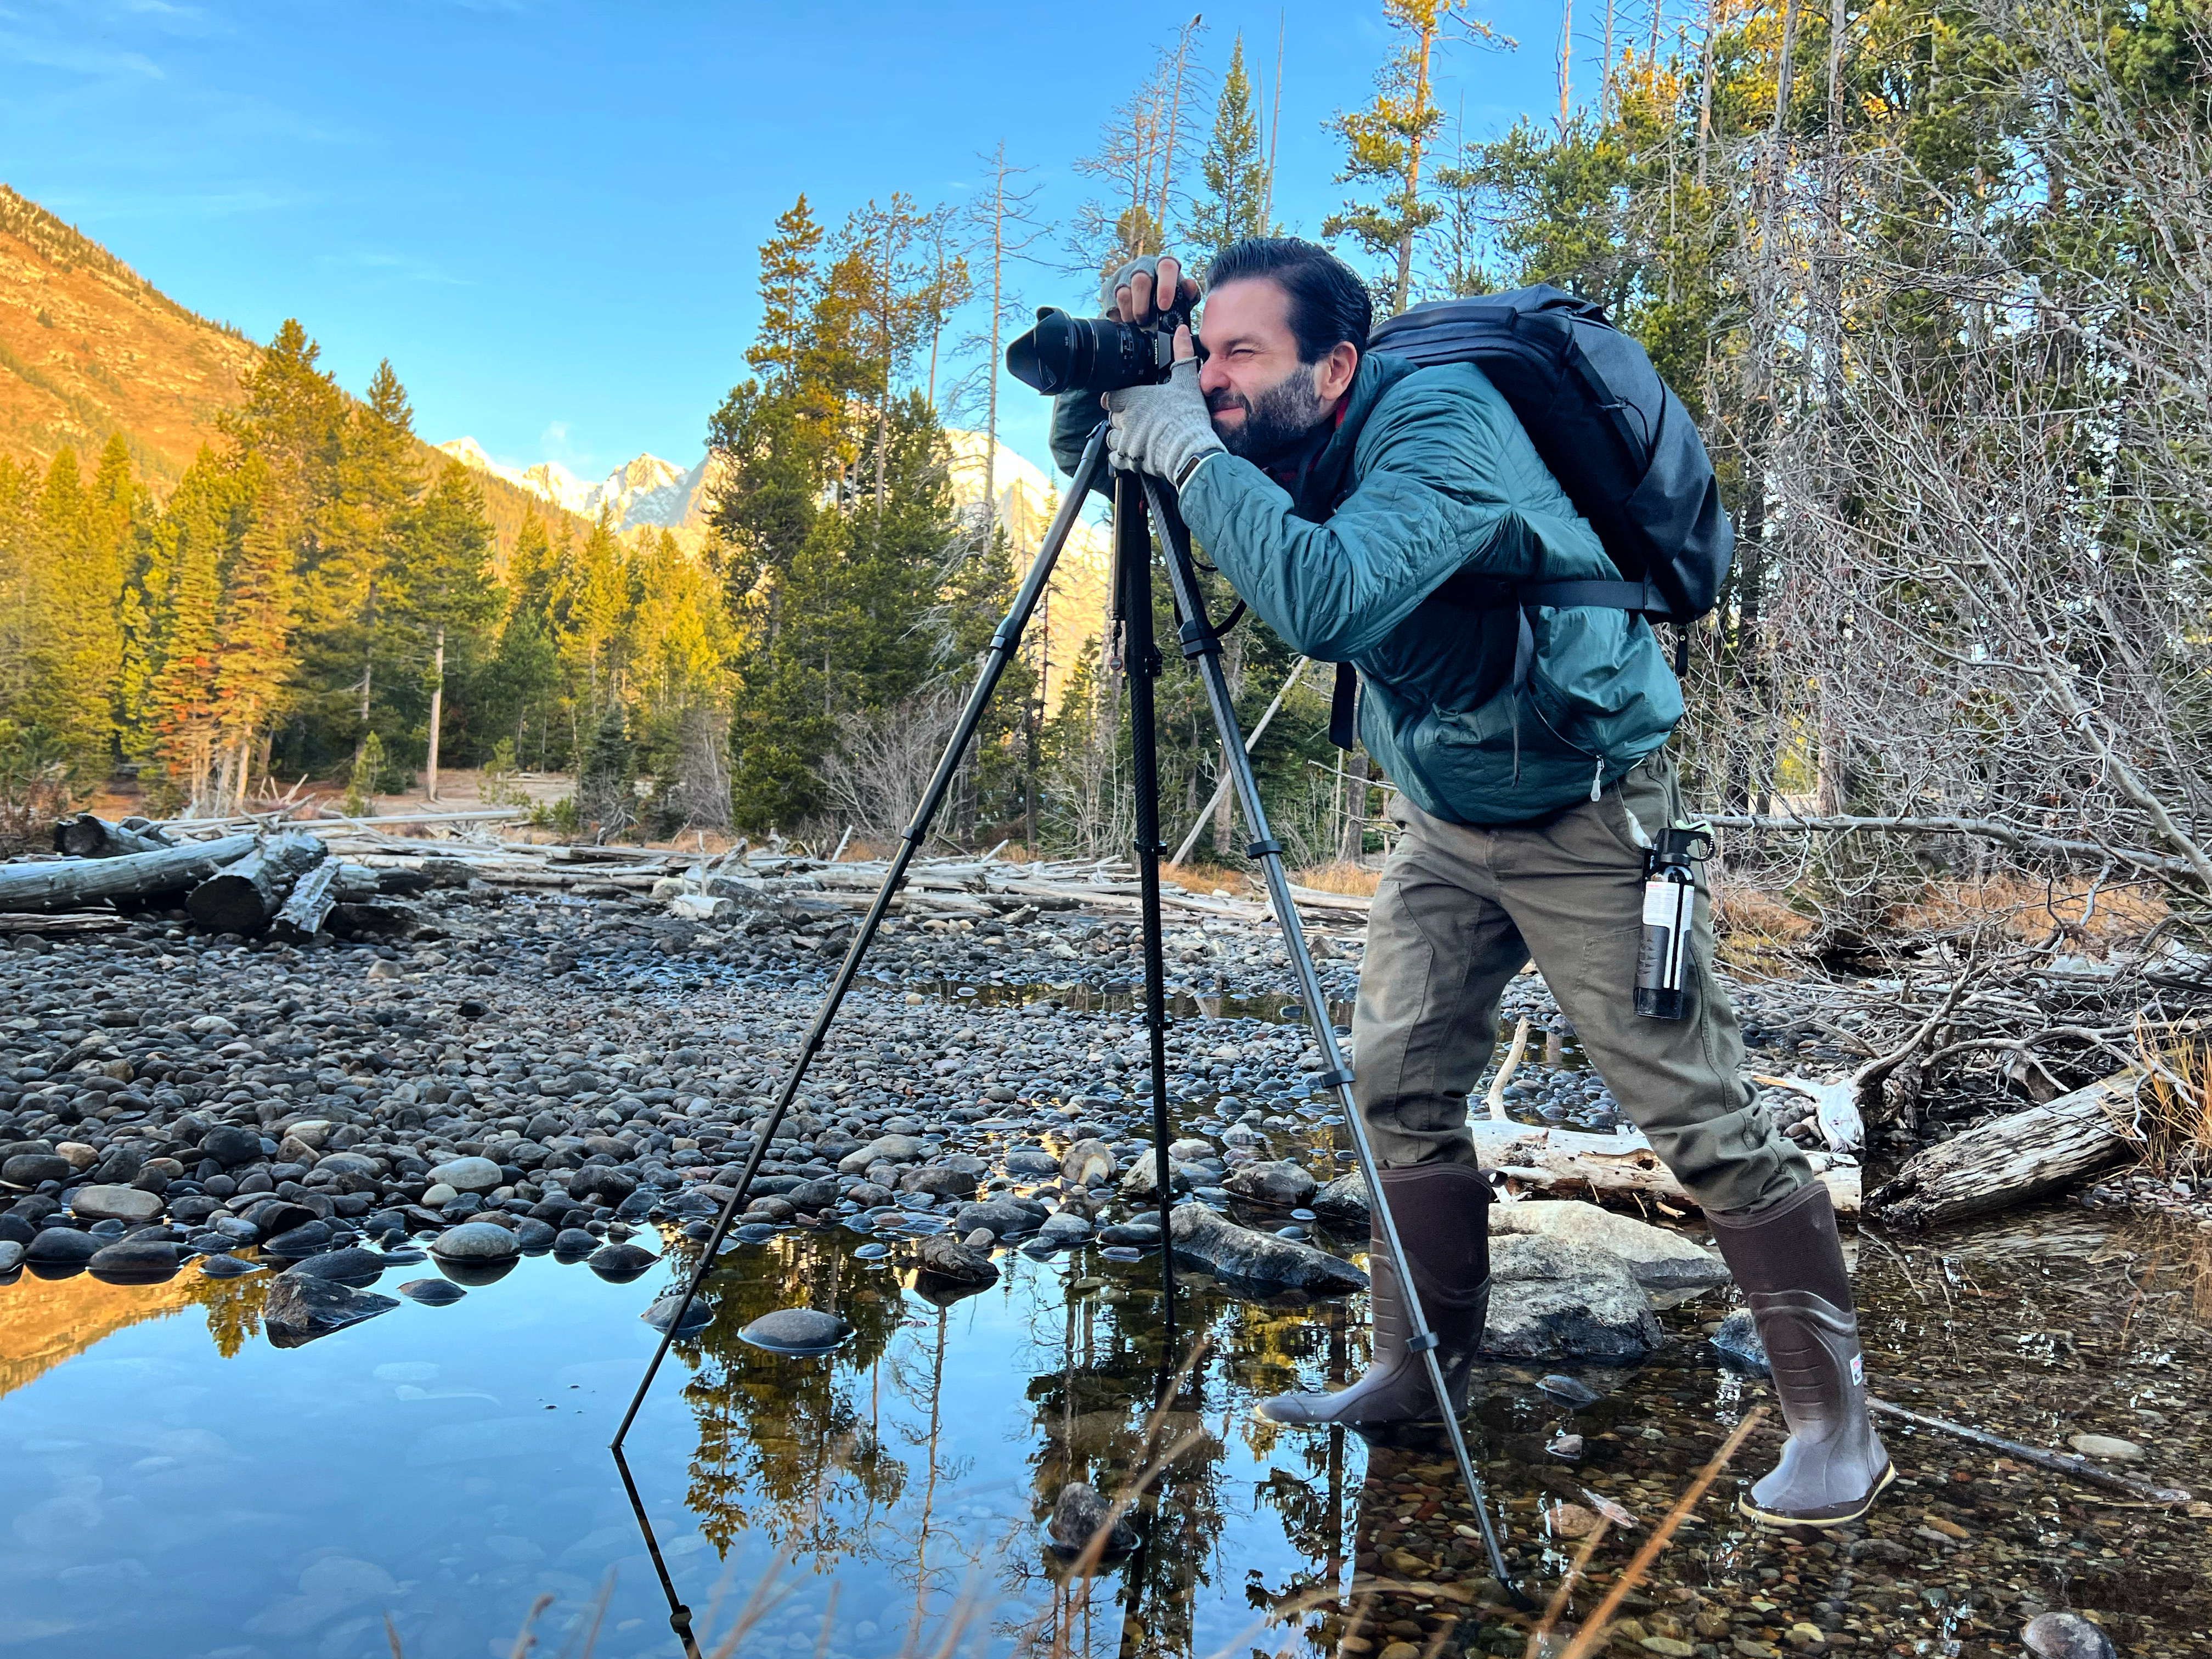 Me, looking through the viewfinder of my camera on a tripod, standing in water on a stream . In the background, a line of lodgepole pine trees, and behind them, Mount Moran. I'm wearing a green jacket and pants, green Xtratuf boots, gray gloves, a black backpack, and a can of bear spray.